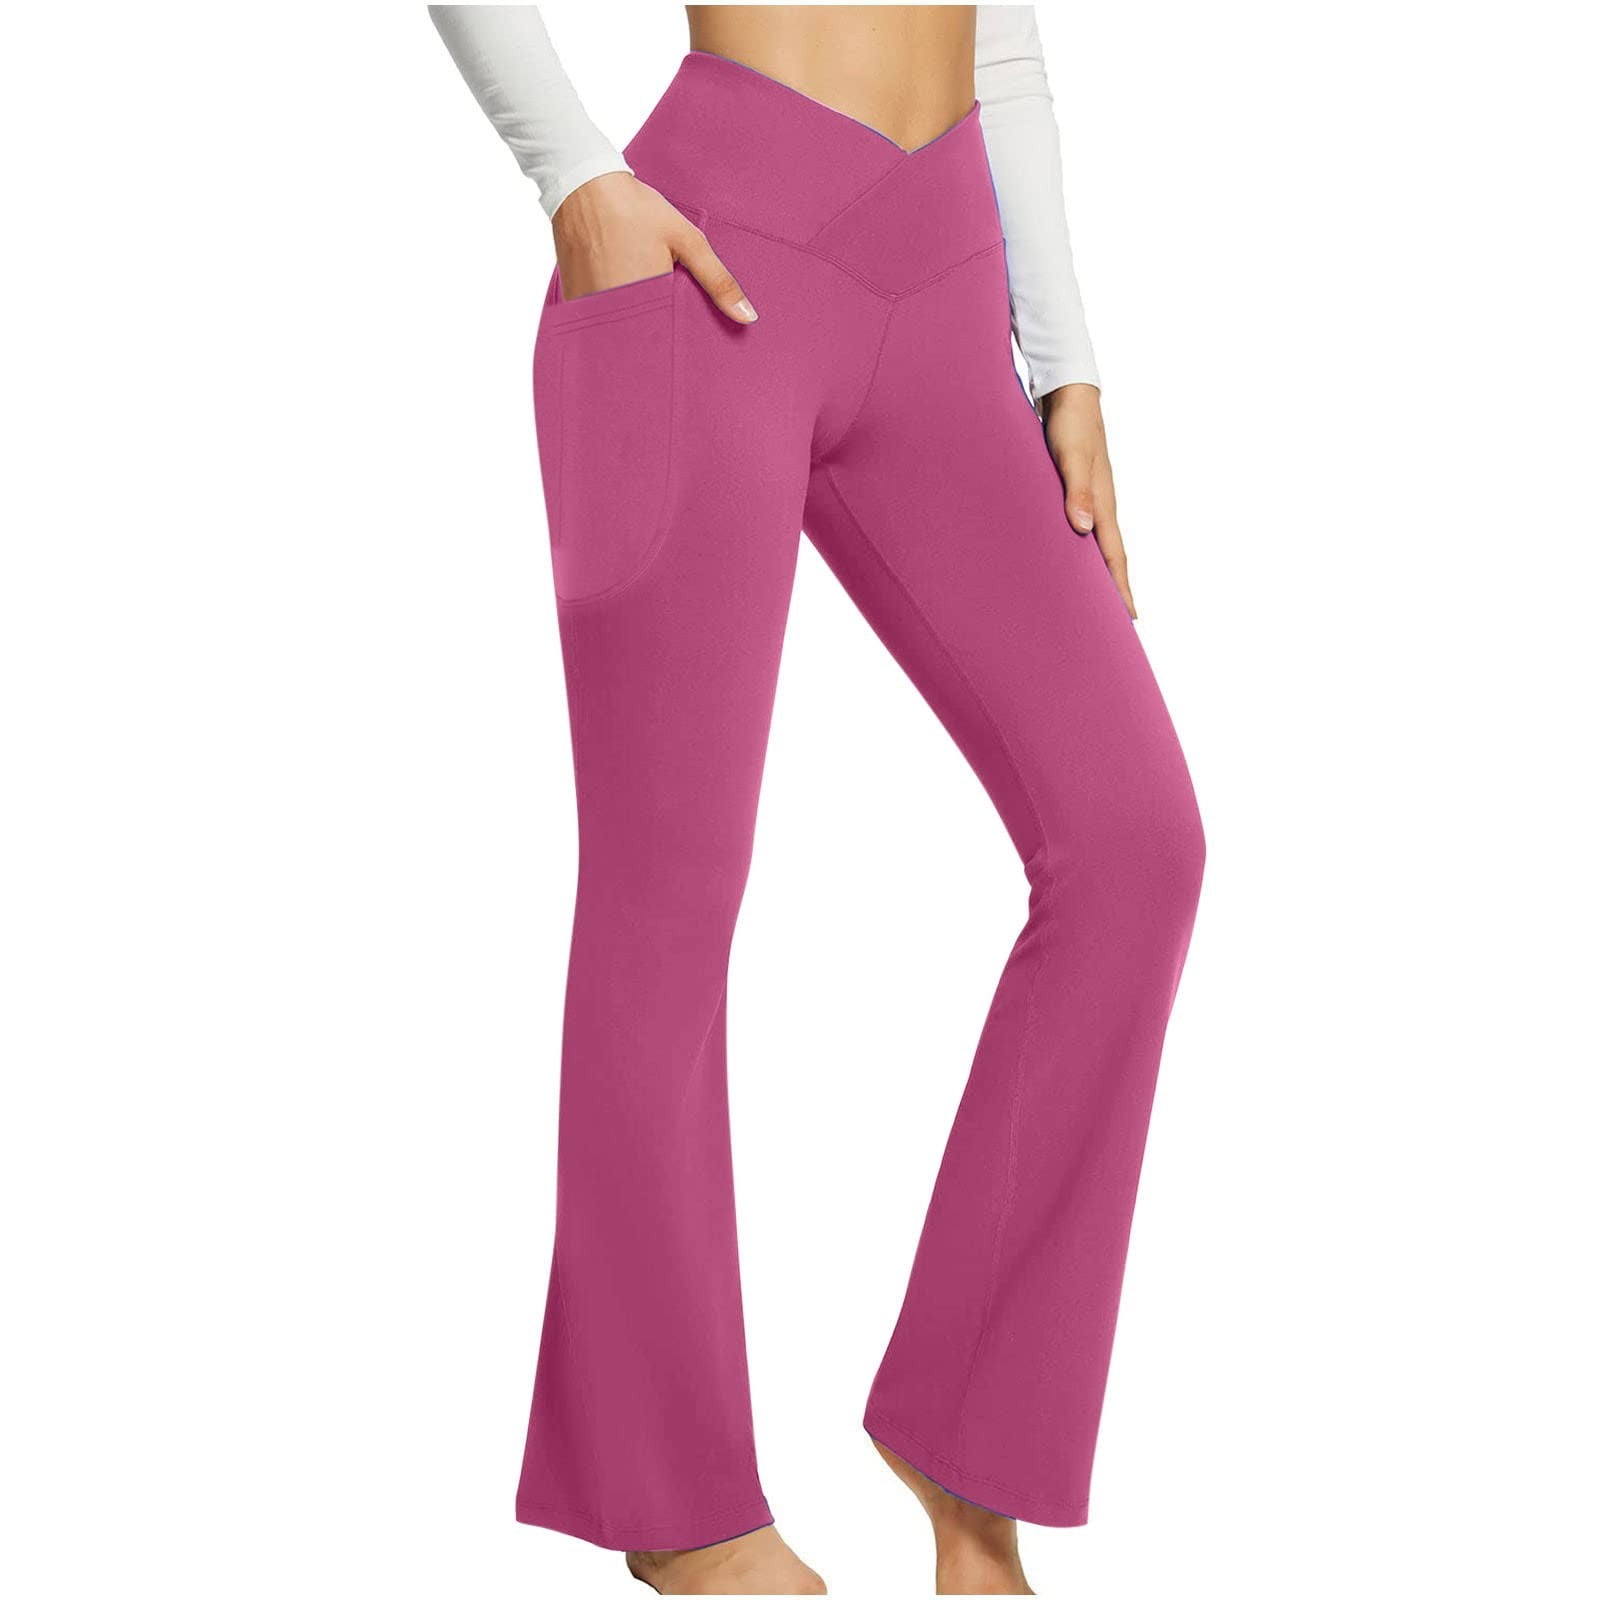 No Boundaries Juniors and Juniors Plus Flare Leggings with Foldover Waist,  Sizes XS to 3X